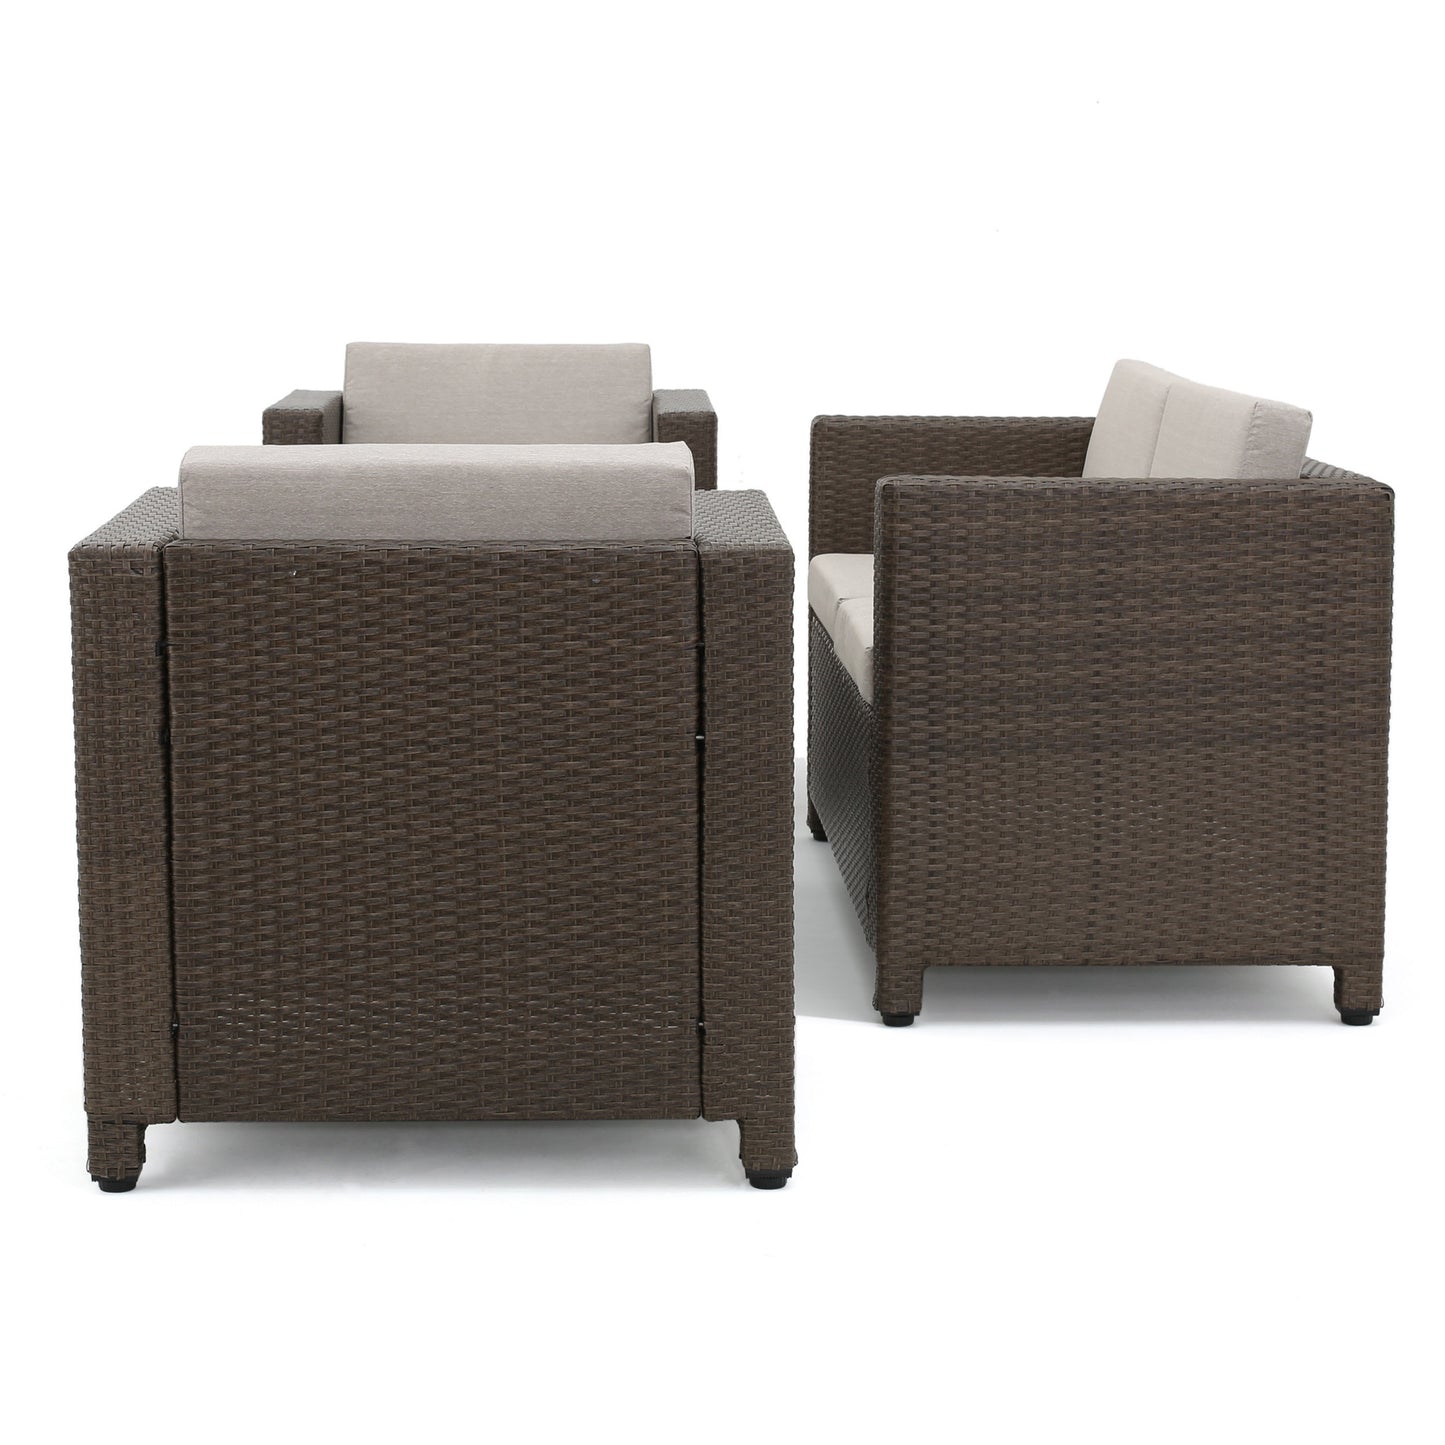 Pueblo 4 Piece Wicker Chat Set w/ Water Resistant Cushions & Cover